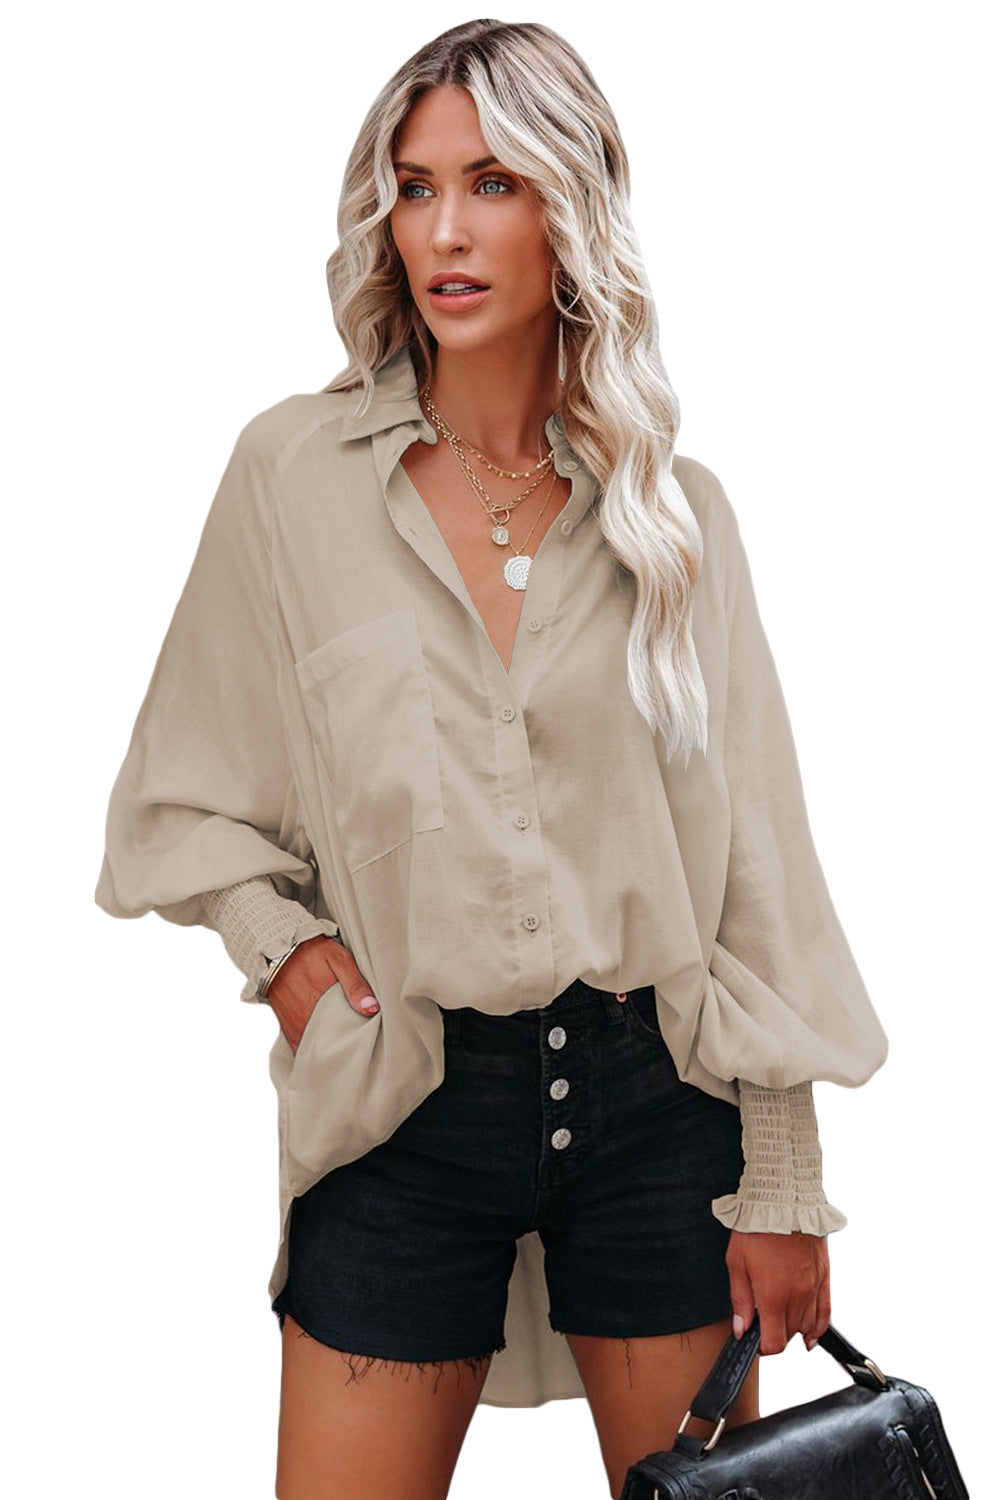 Spring And Autumn New Lapel Shirts Thin Mid Length Striped Casual Long Sleeve Shirts Top For Women